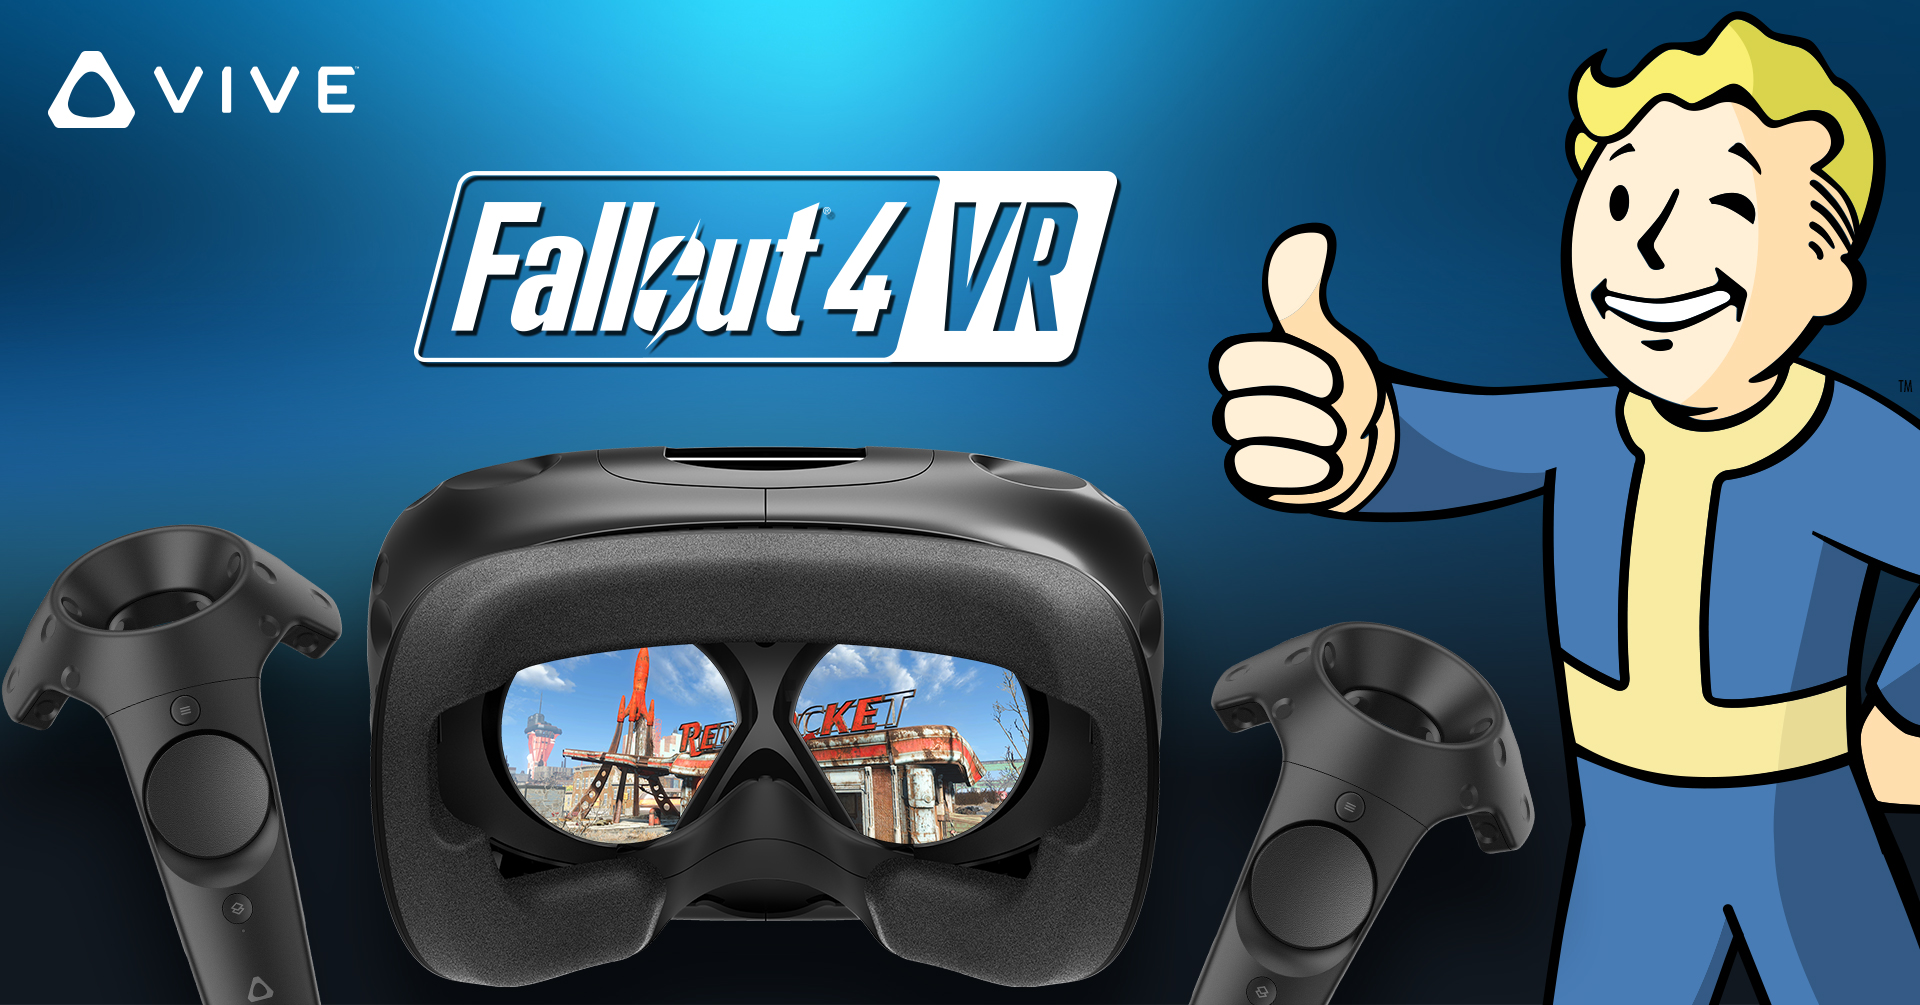 fallout 4 vr cosmos